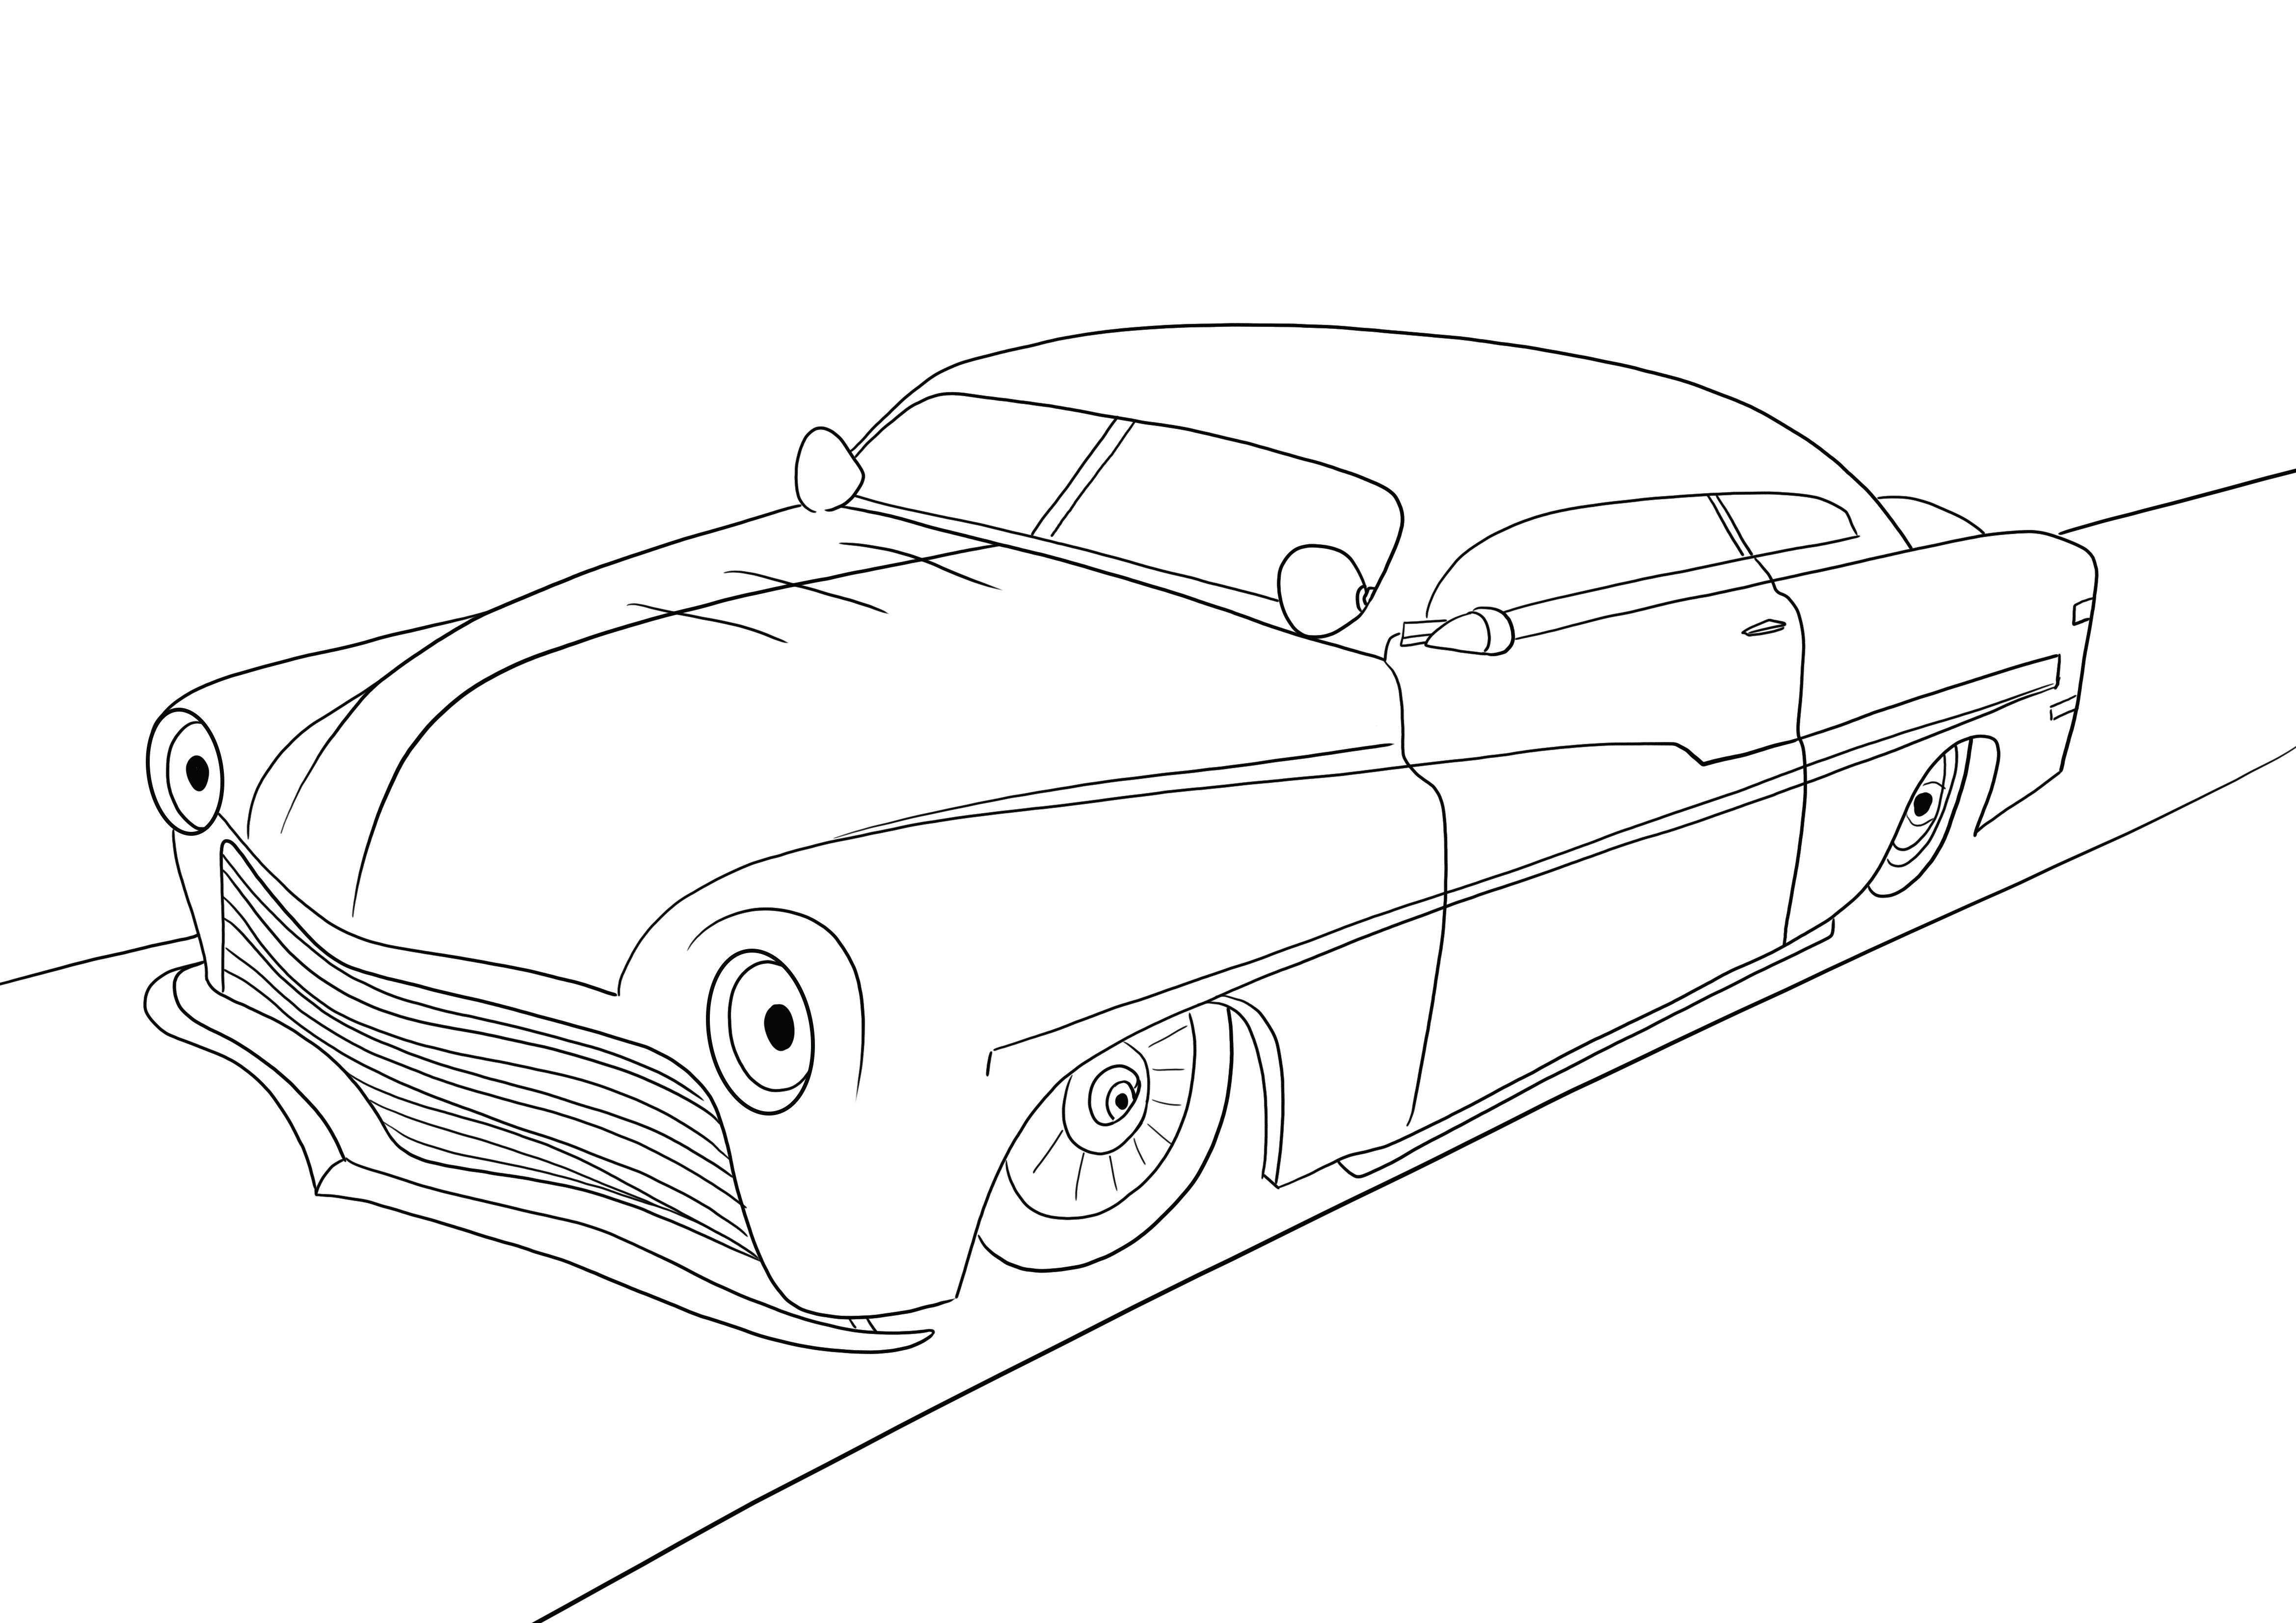 Easy 50s Lowrider Hot Rod and free coloring sheet to color for kids